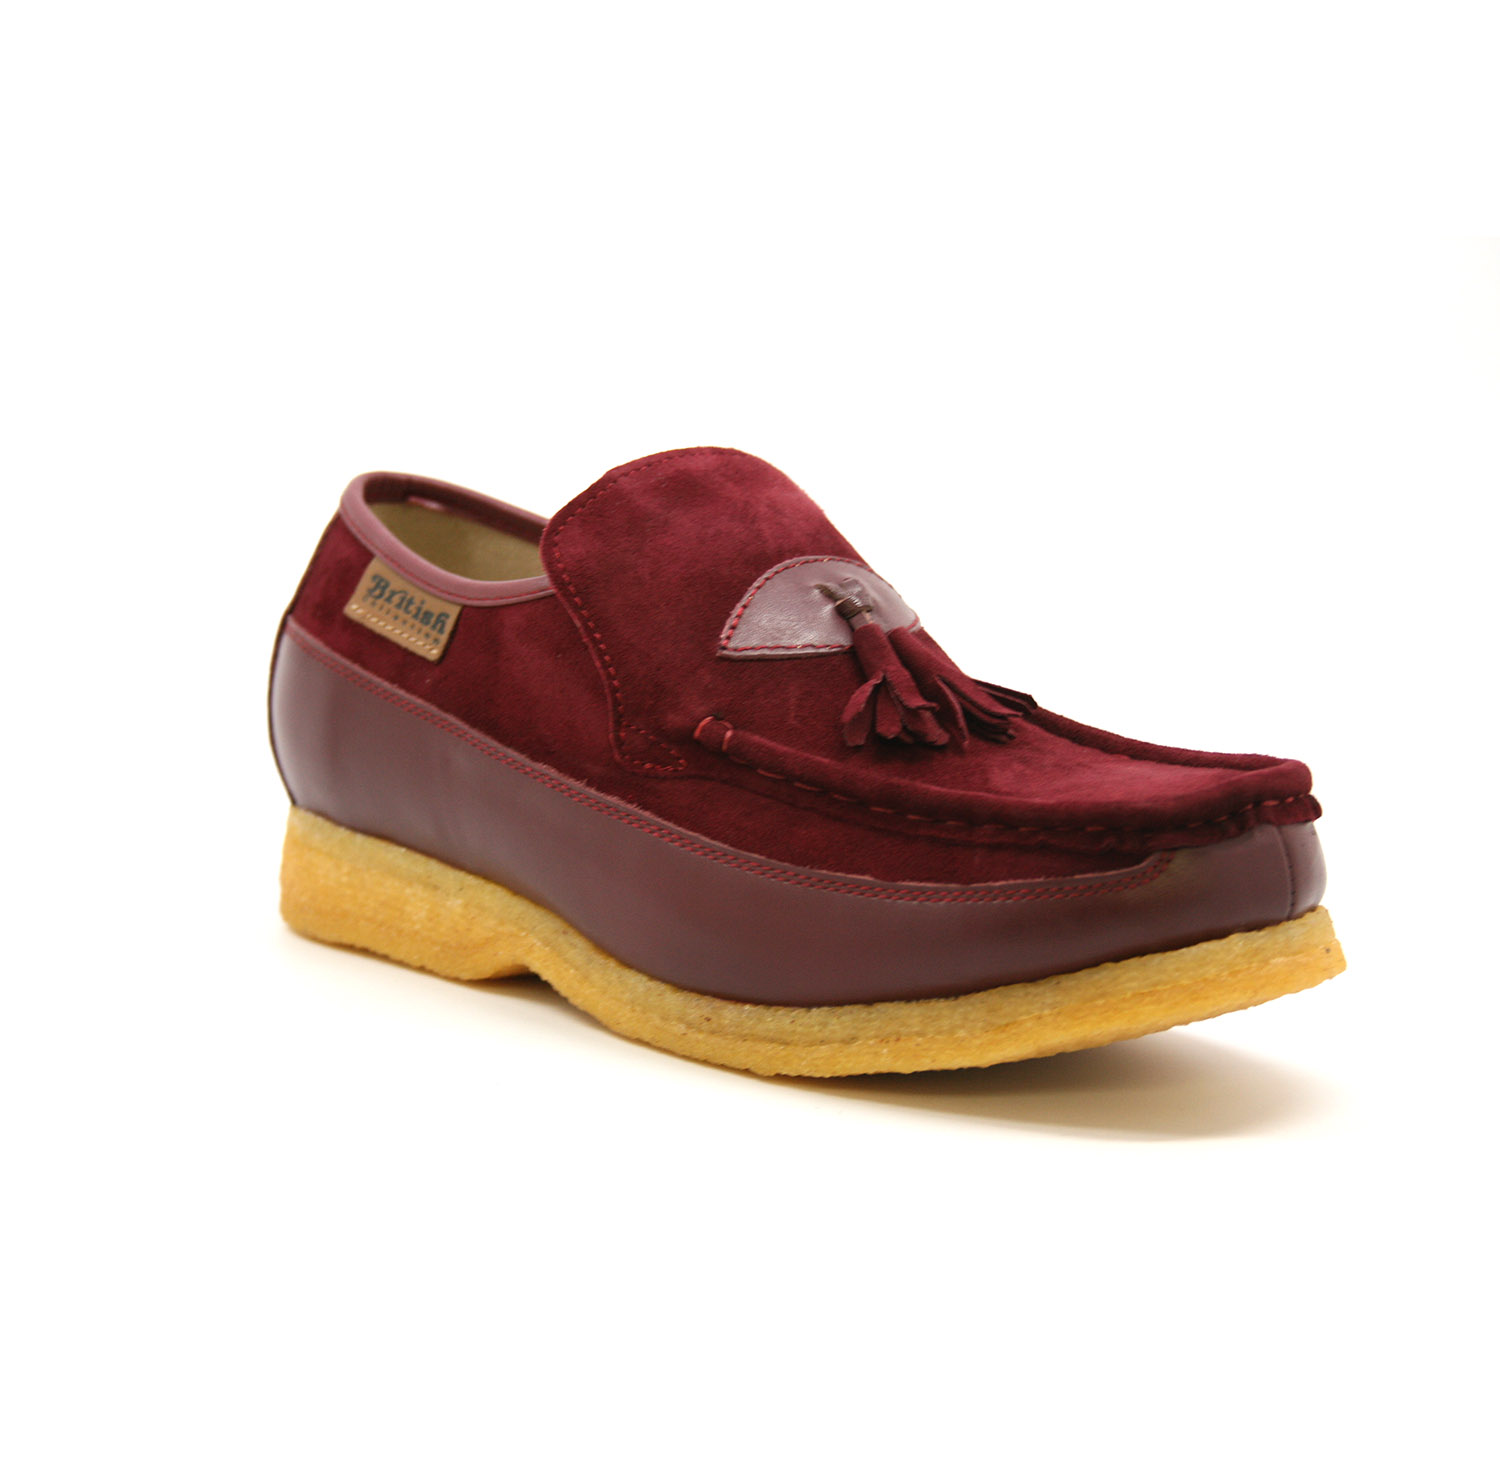 British Collection King Old School Slip On Burgundy Su/Le shoes [118-03 ...